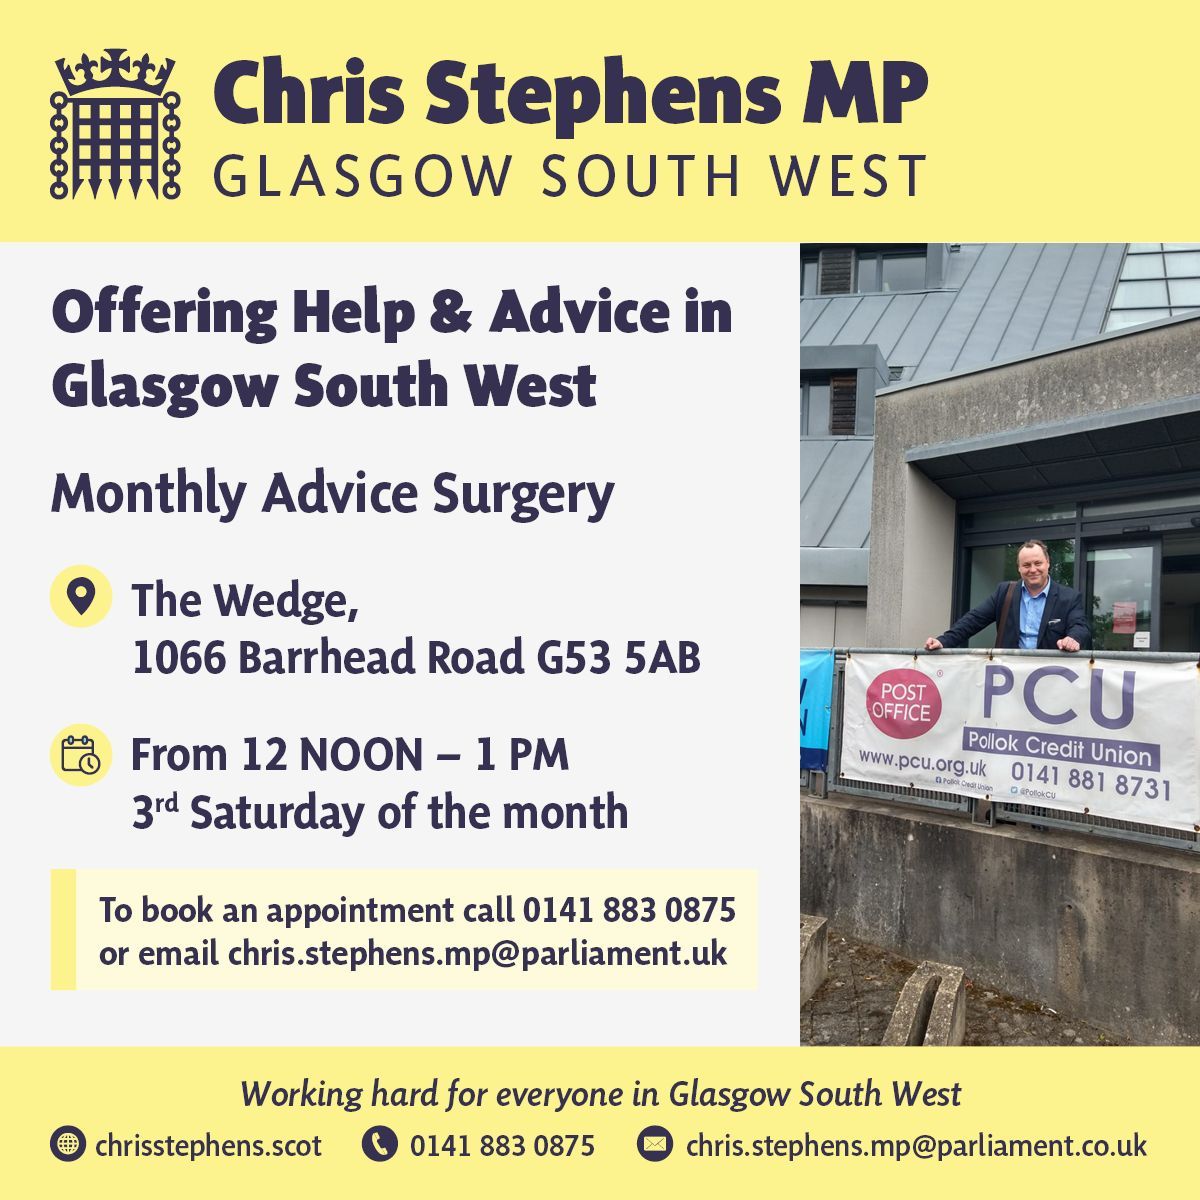 I have surgeries at Ibrox and Pollok on Saturday 18th May. I am at Ibrox Library at 10am and The Wedge at 12 noon, both on Sat 18th May. To book please email chris.stephens.mp@parliament.uk or call 0141 883 0875.